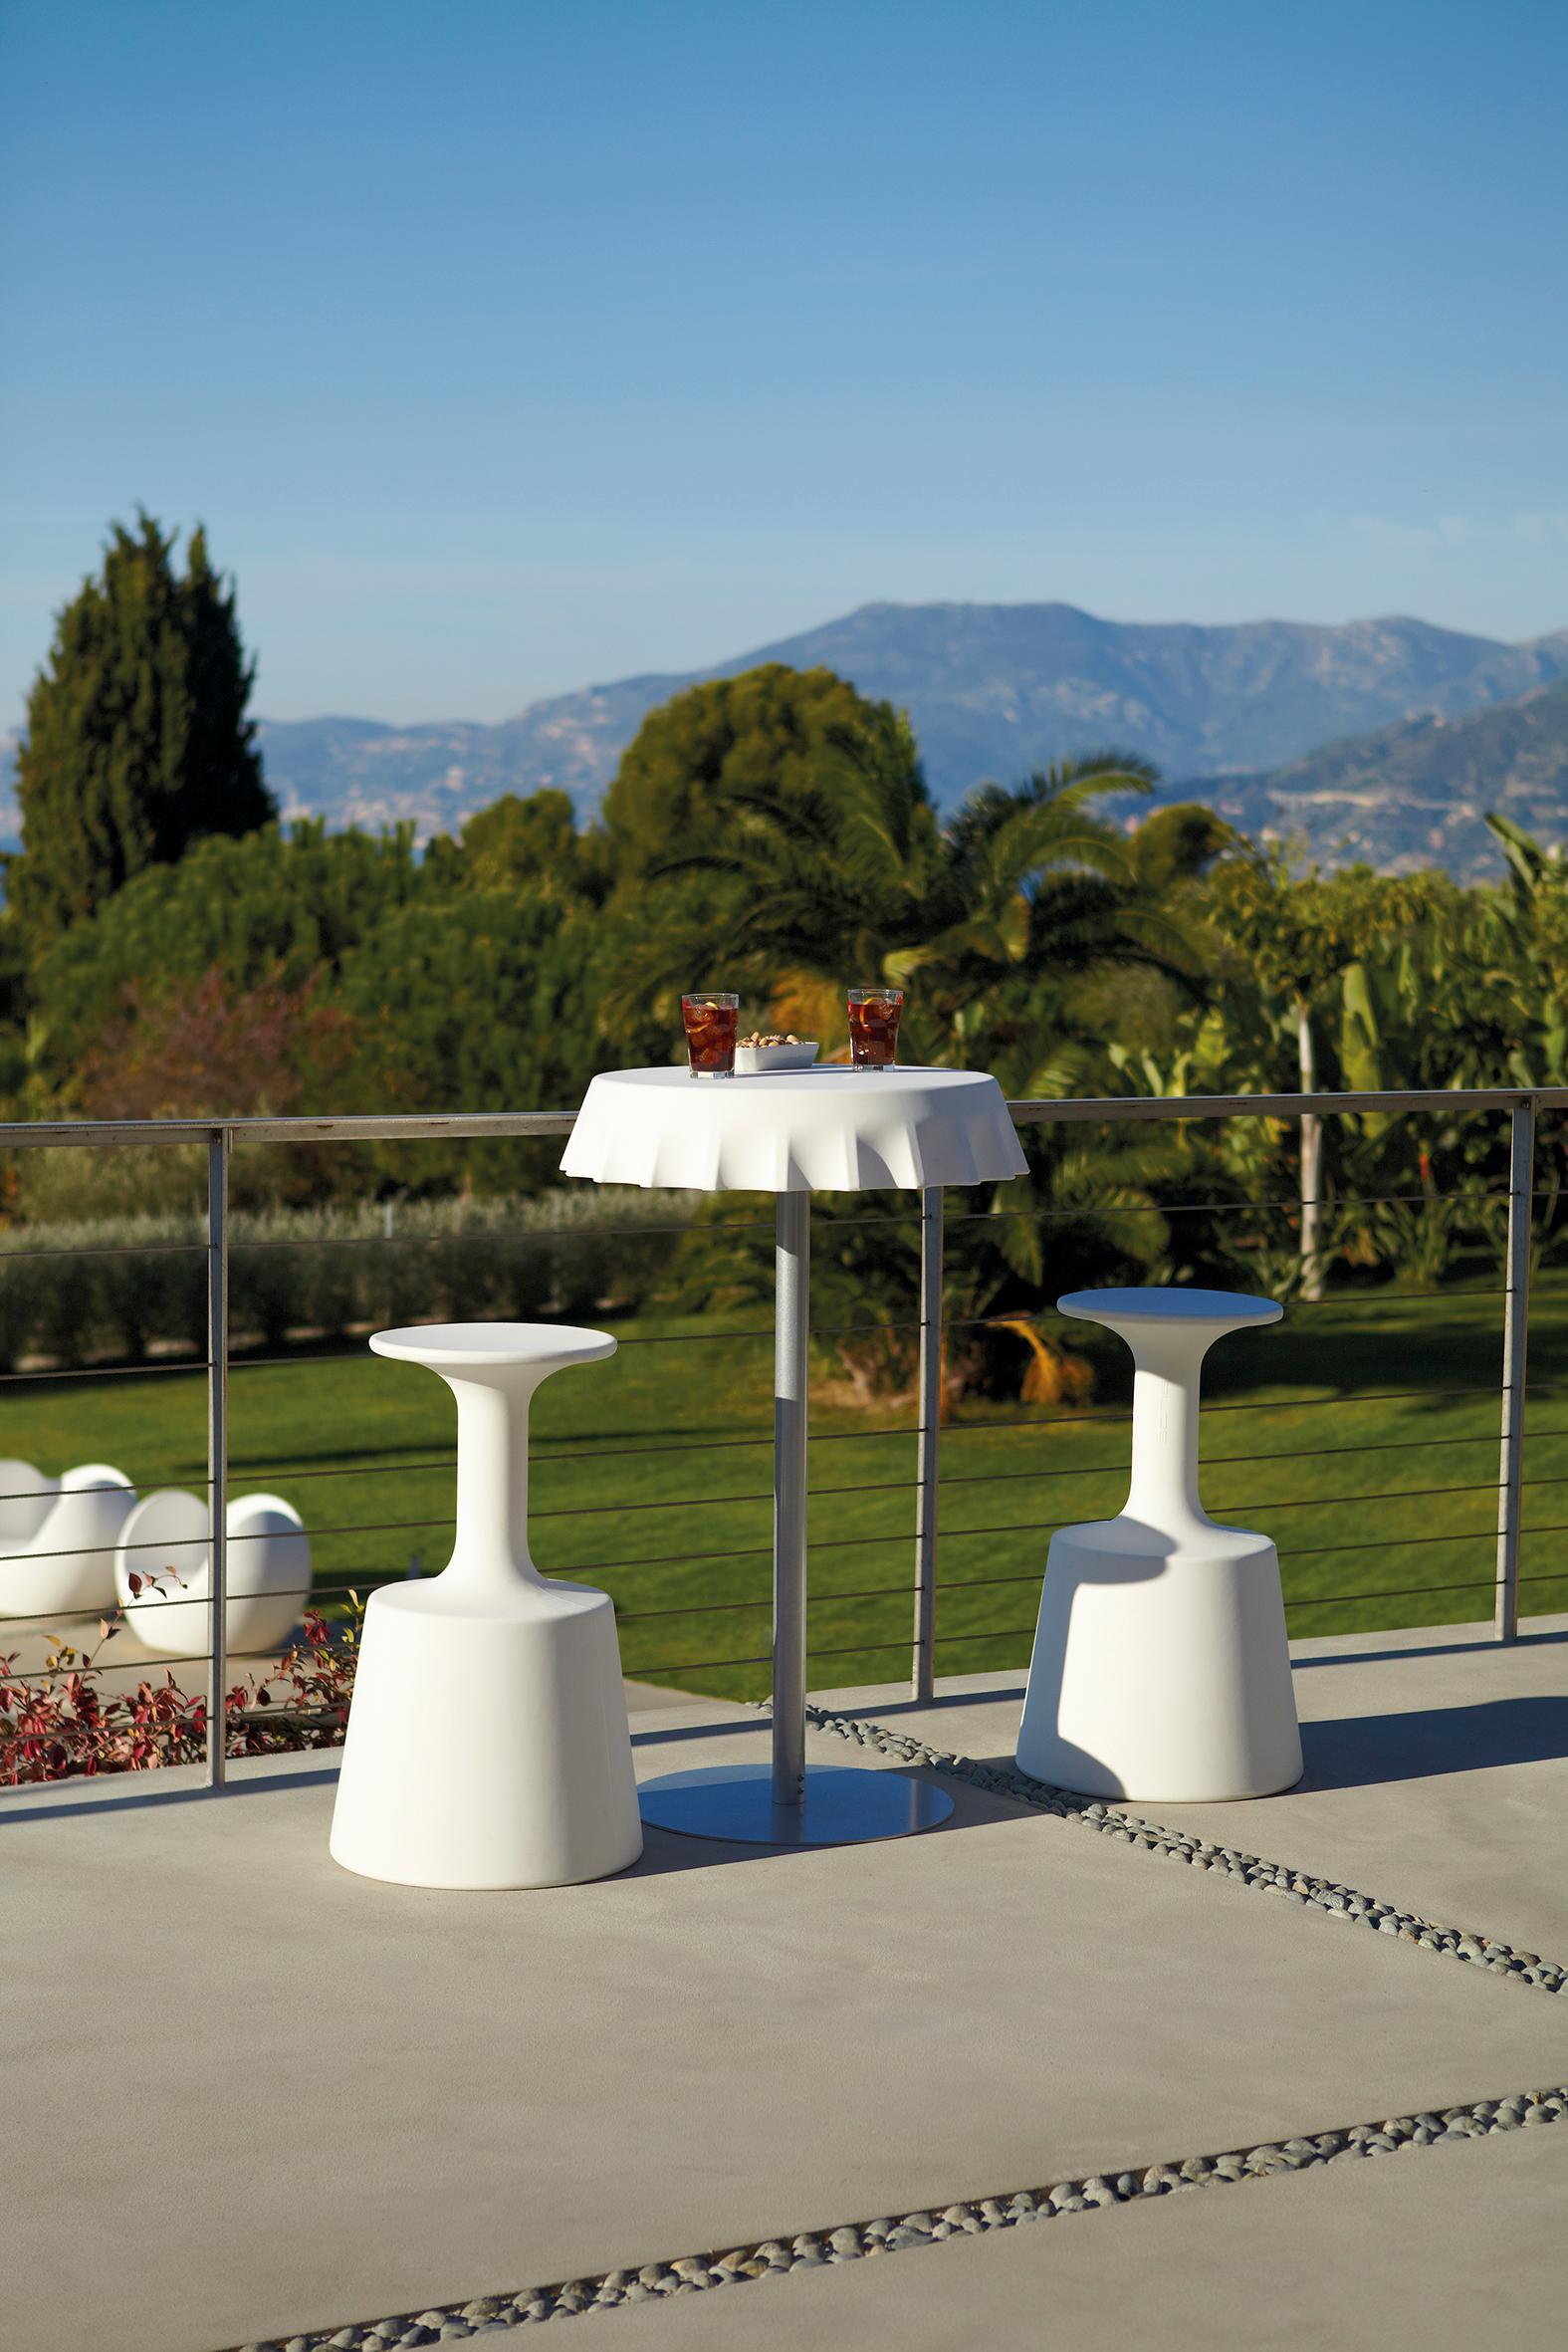 Glamour Black Glossy Drink High Stool by Jorge Najera
Dimensions: Ø 45 x H 75 cm. 
Materials: Glossy lacquered polyethylene.
Weight: 7 kg.

Available in different color options. This product is suitable for indoor and outdoor use. Available in